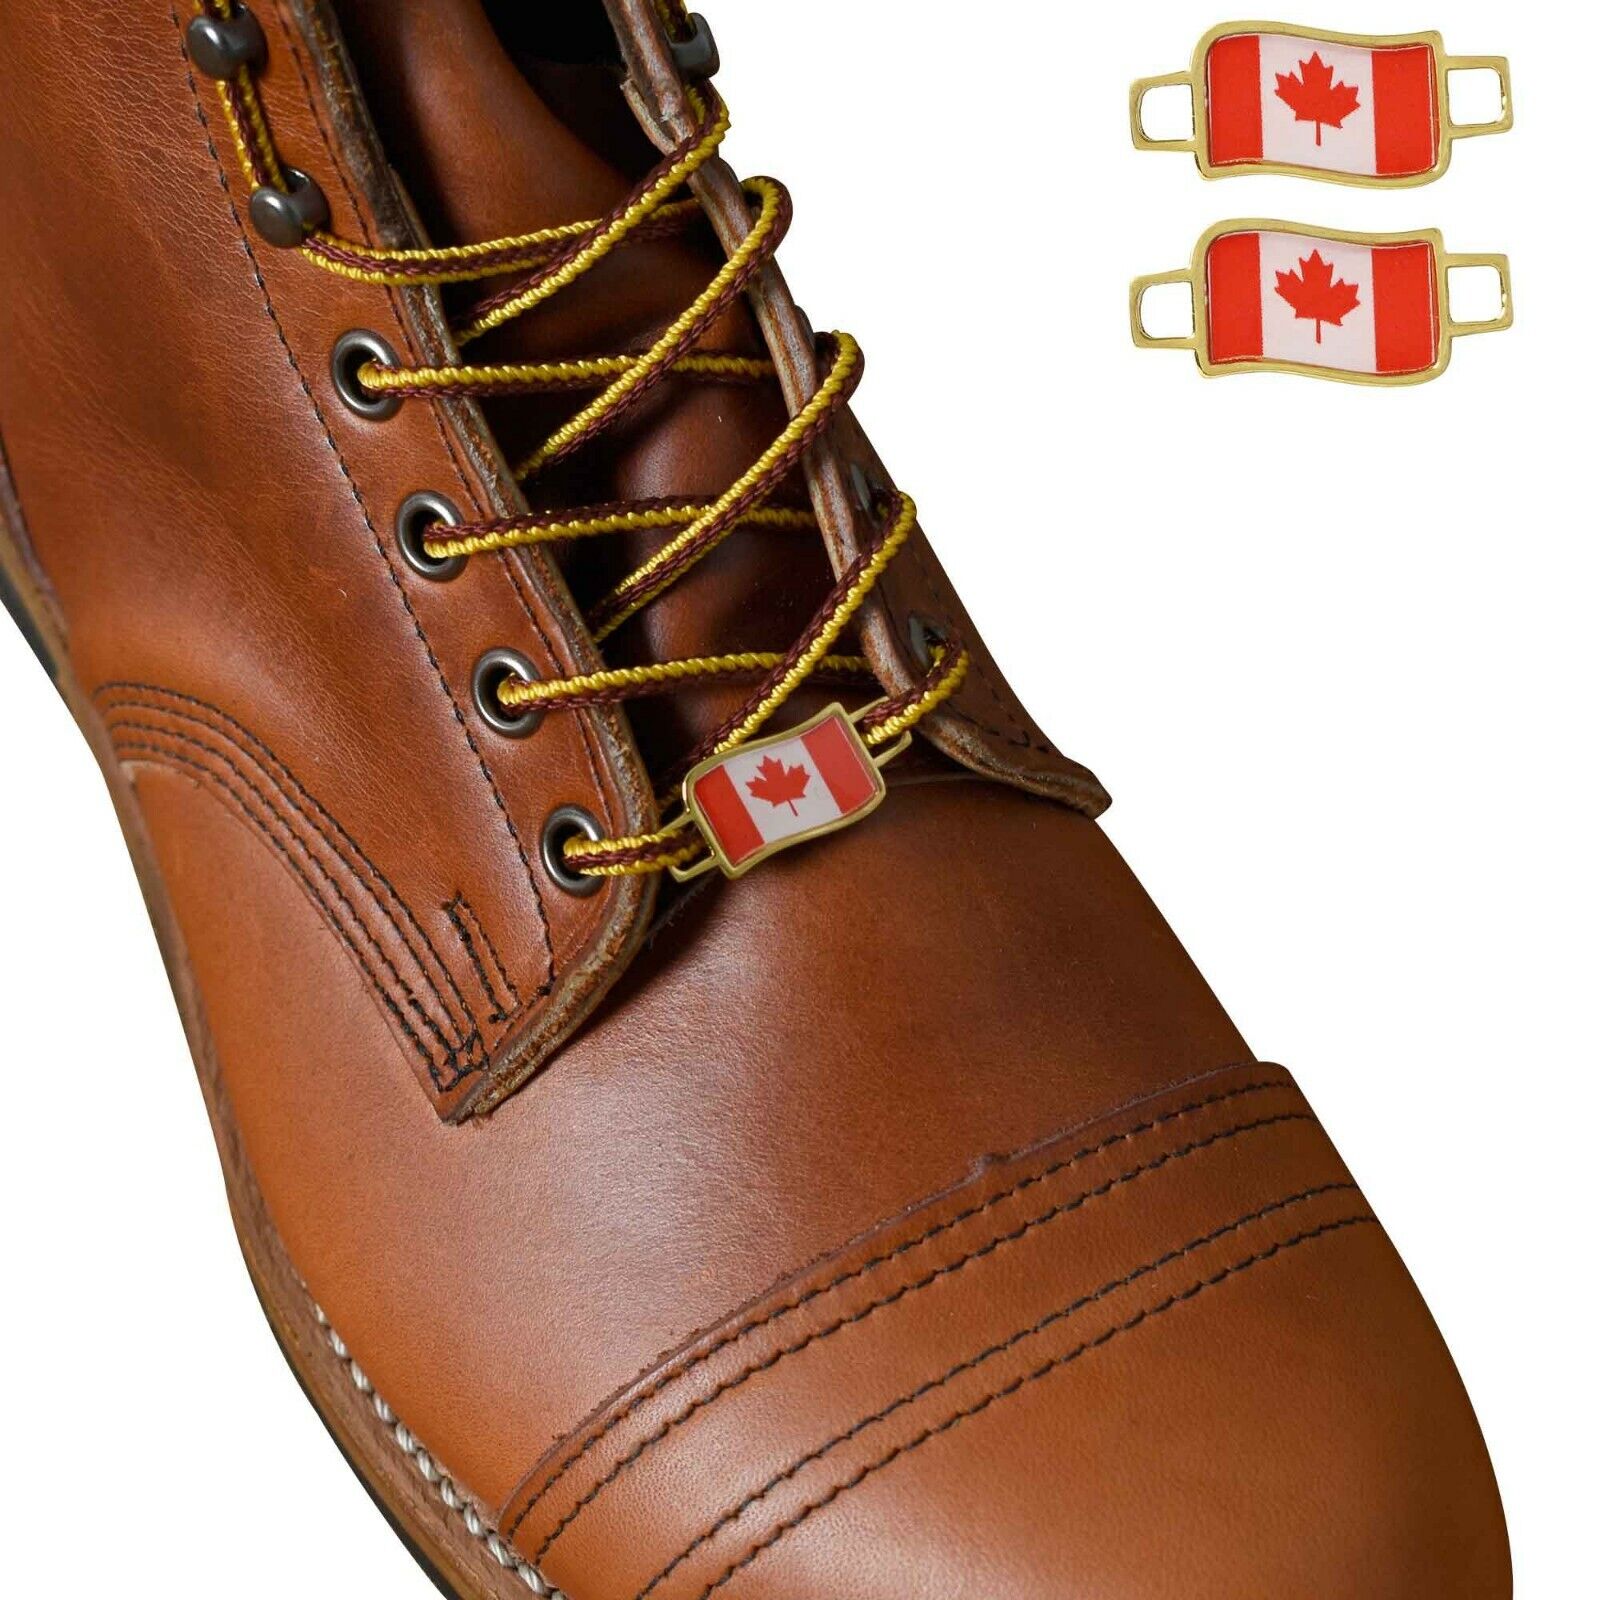 Canada Flags Shoes Boot Shoelace Keeper Holder Charm BrooklynMaker